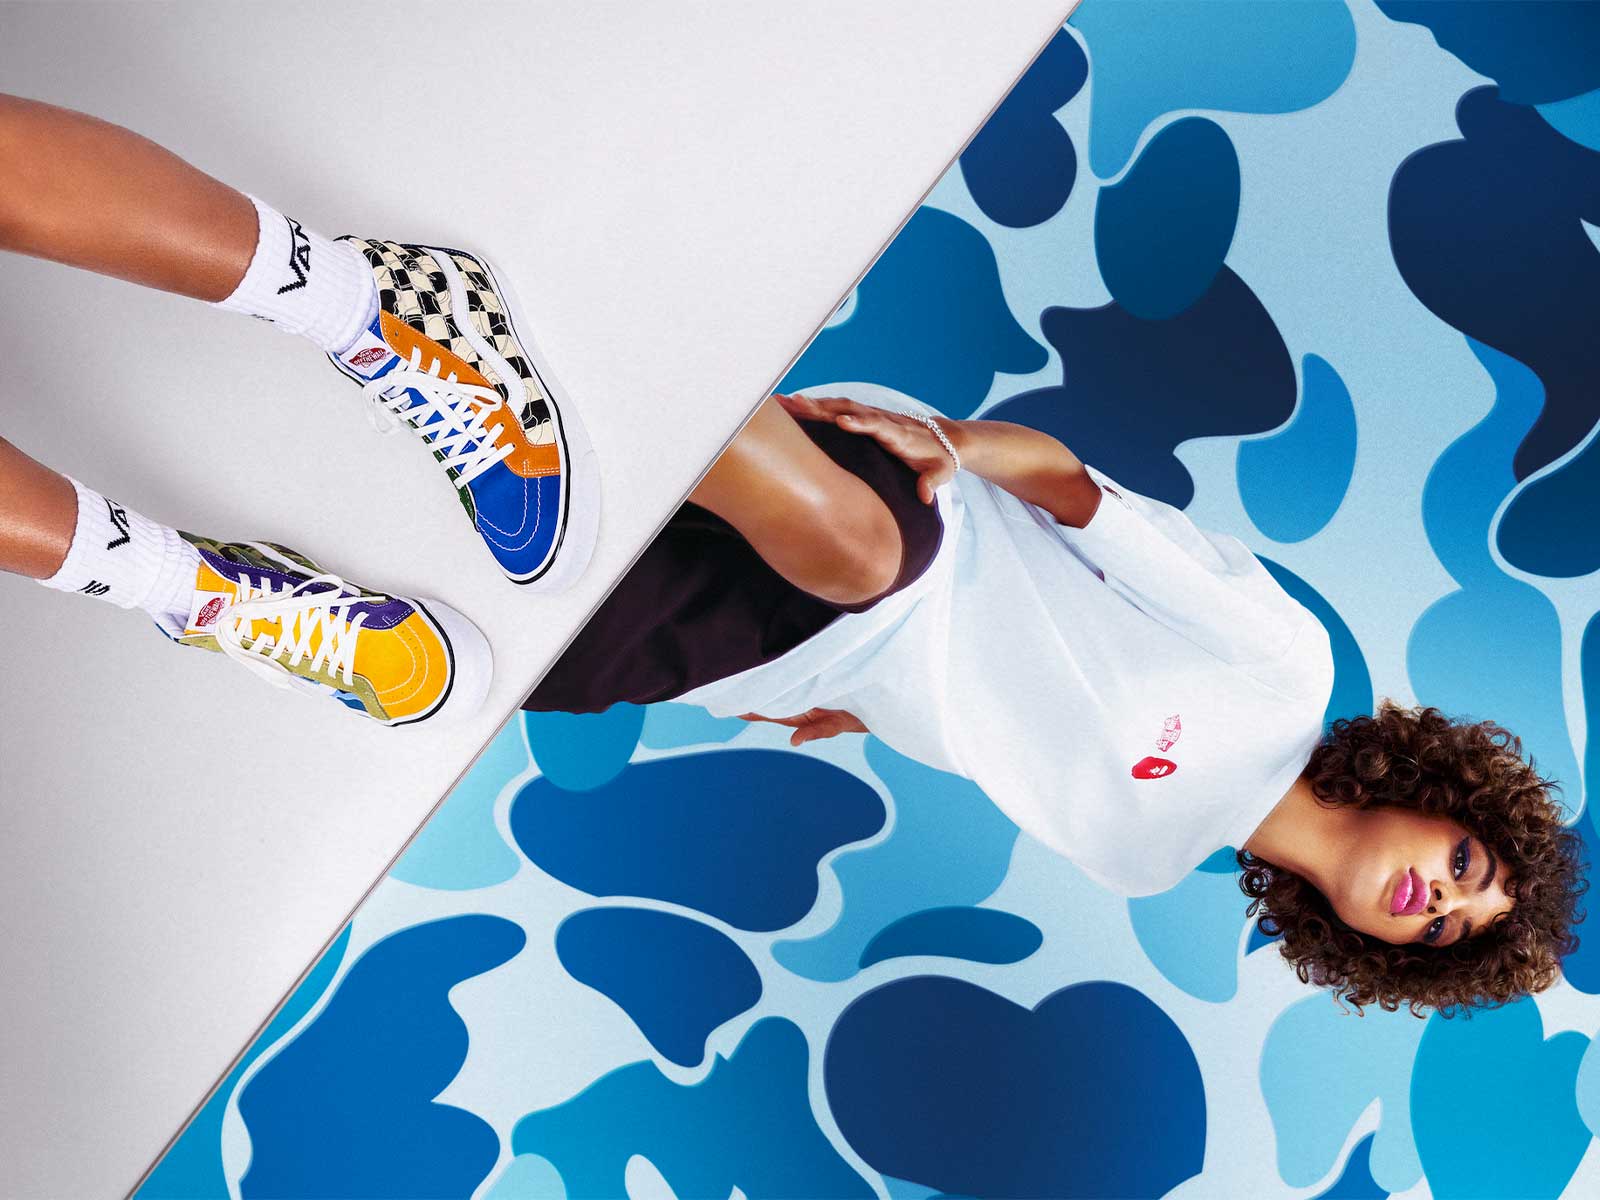 The second collaboration between Vans and Bape® is here